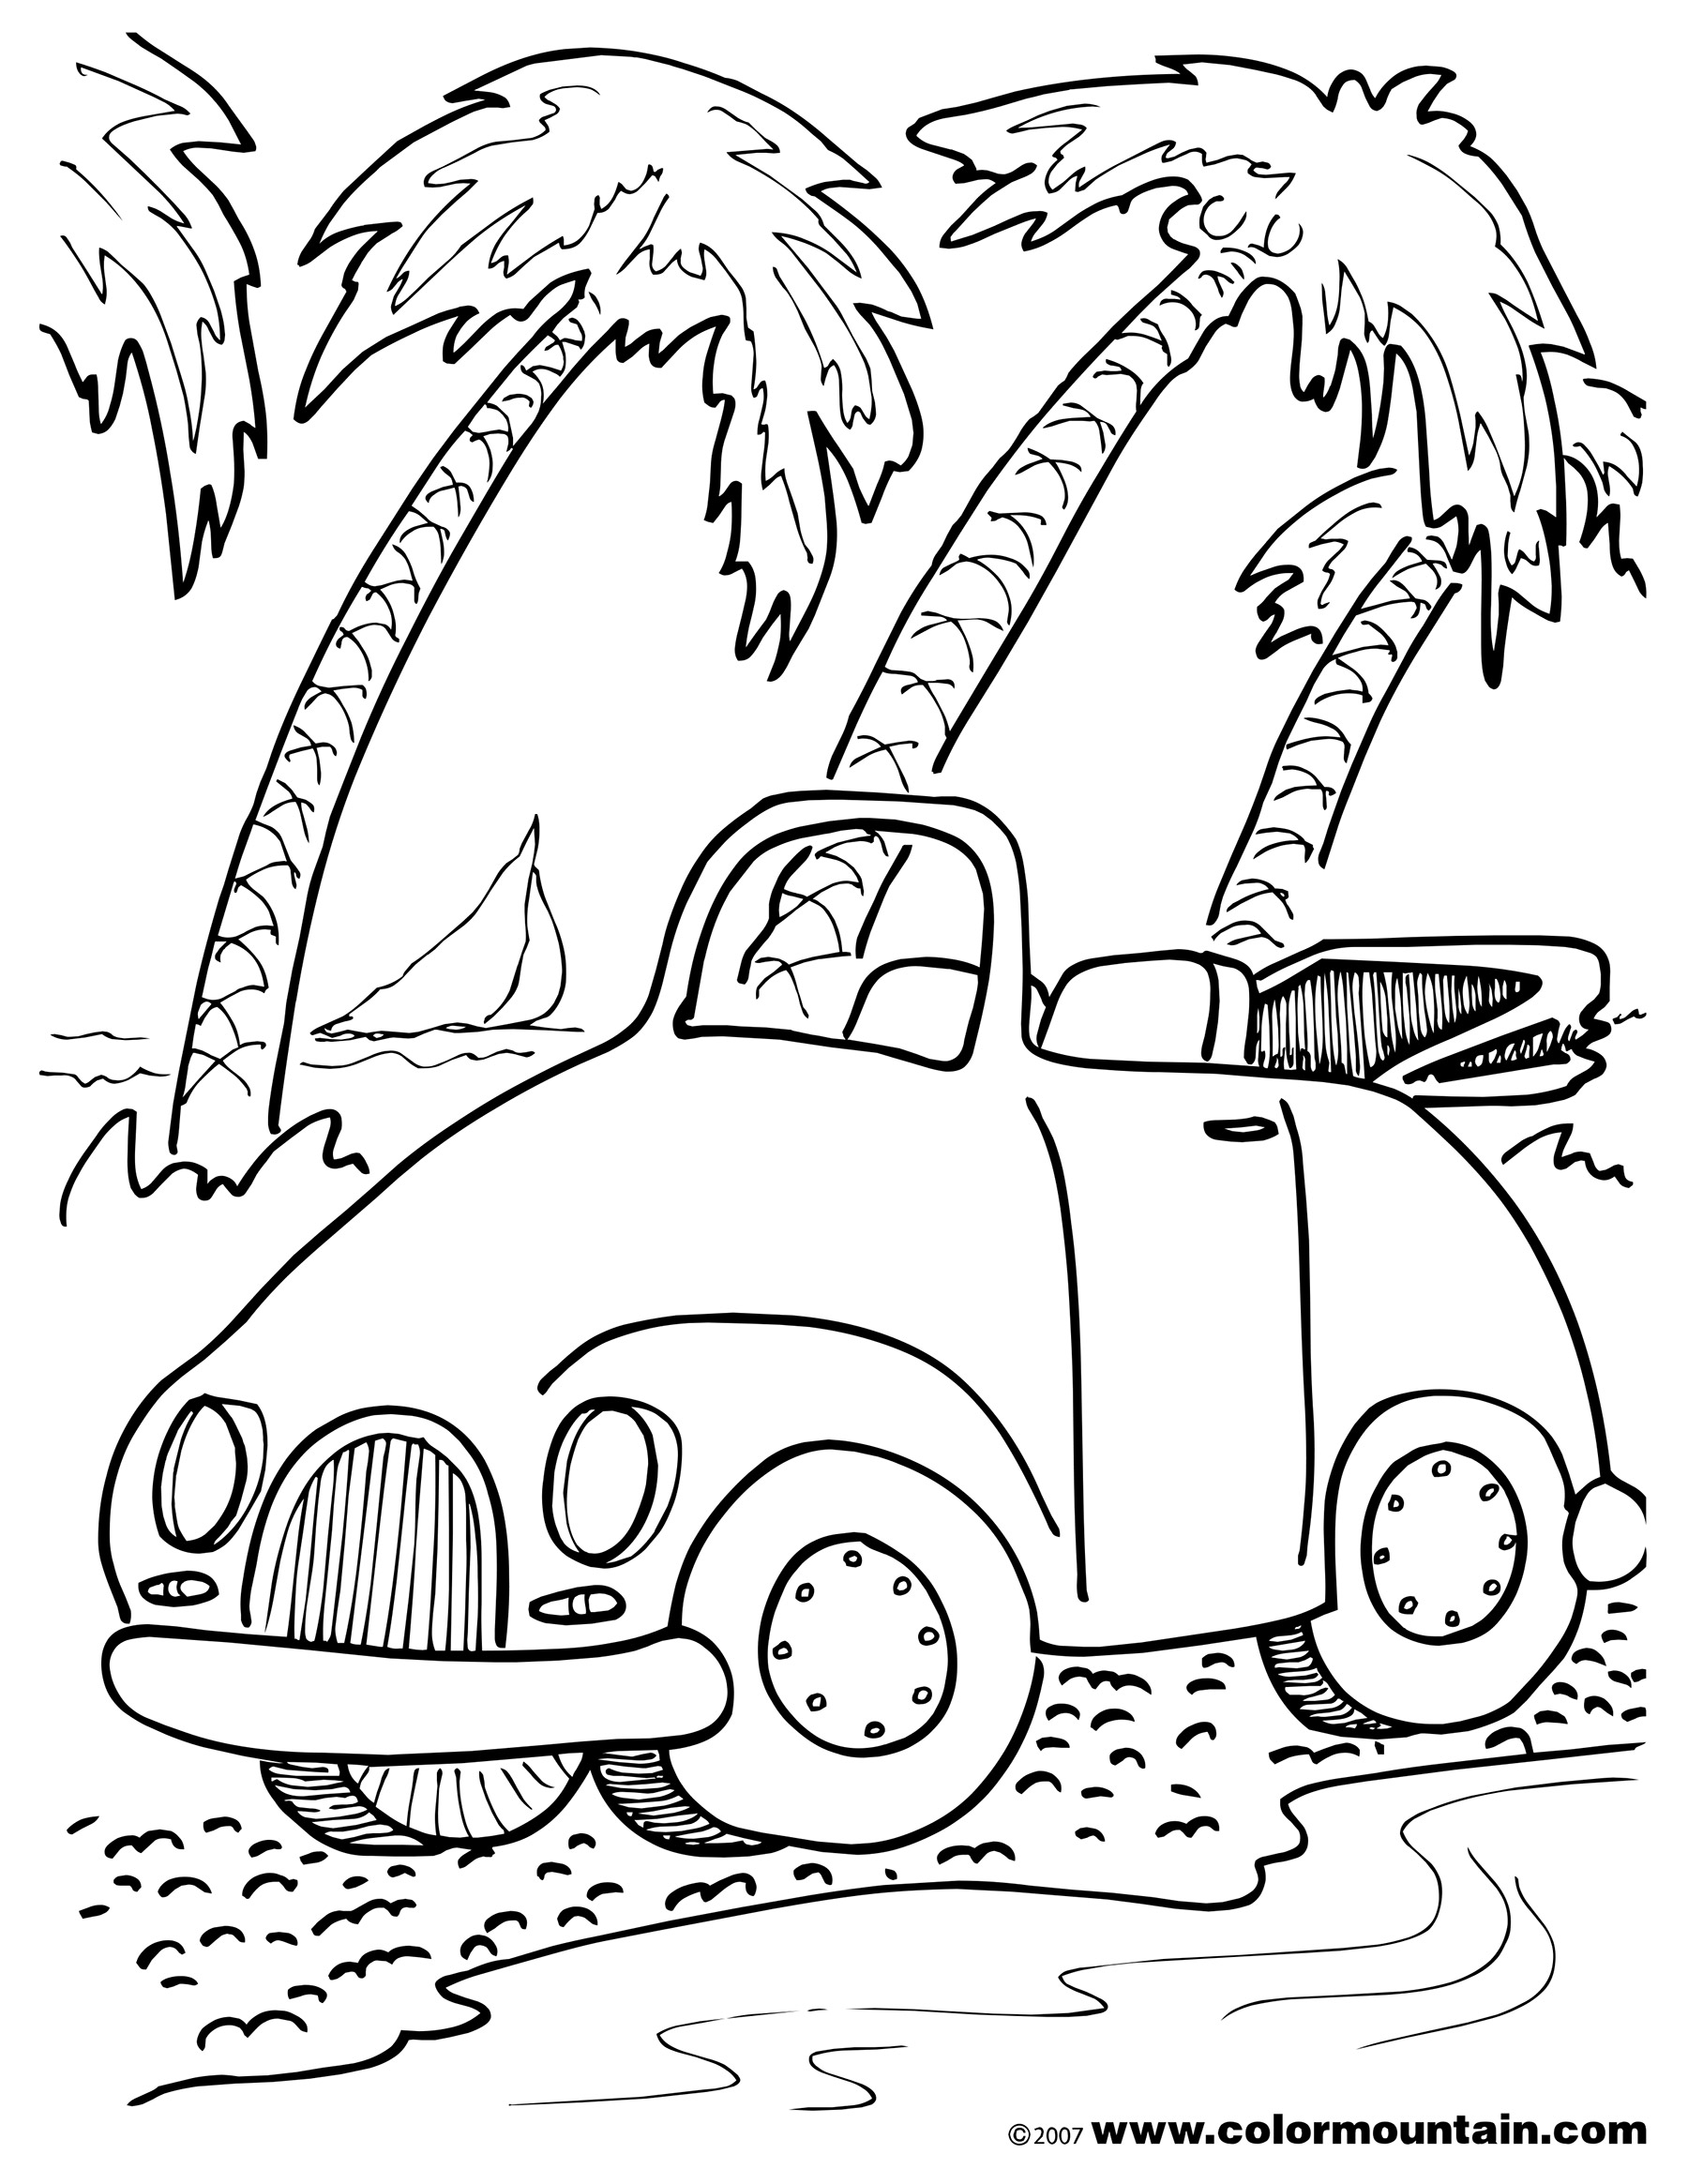 610 Unicorn Convertible Car Coloring Pages with disney character